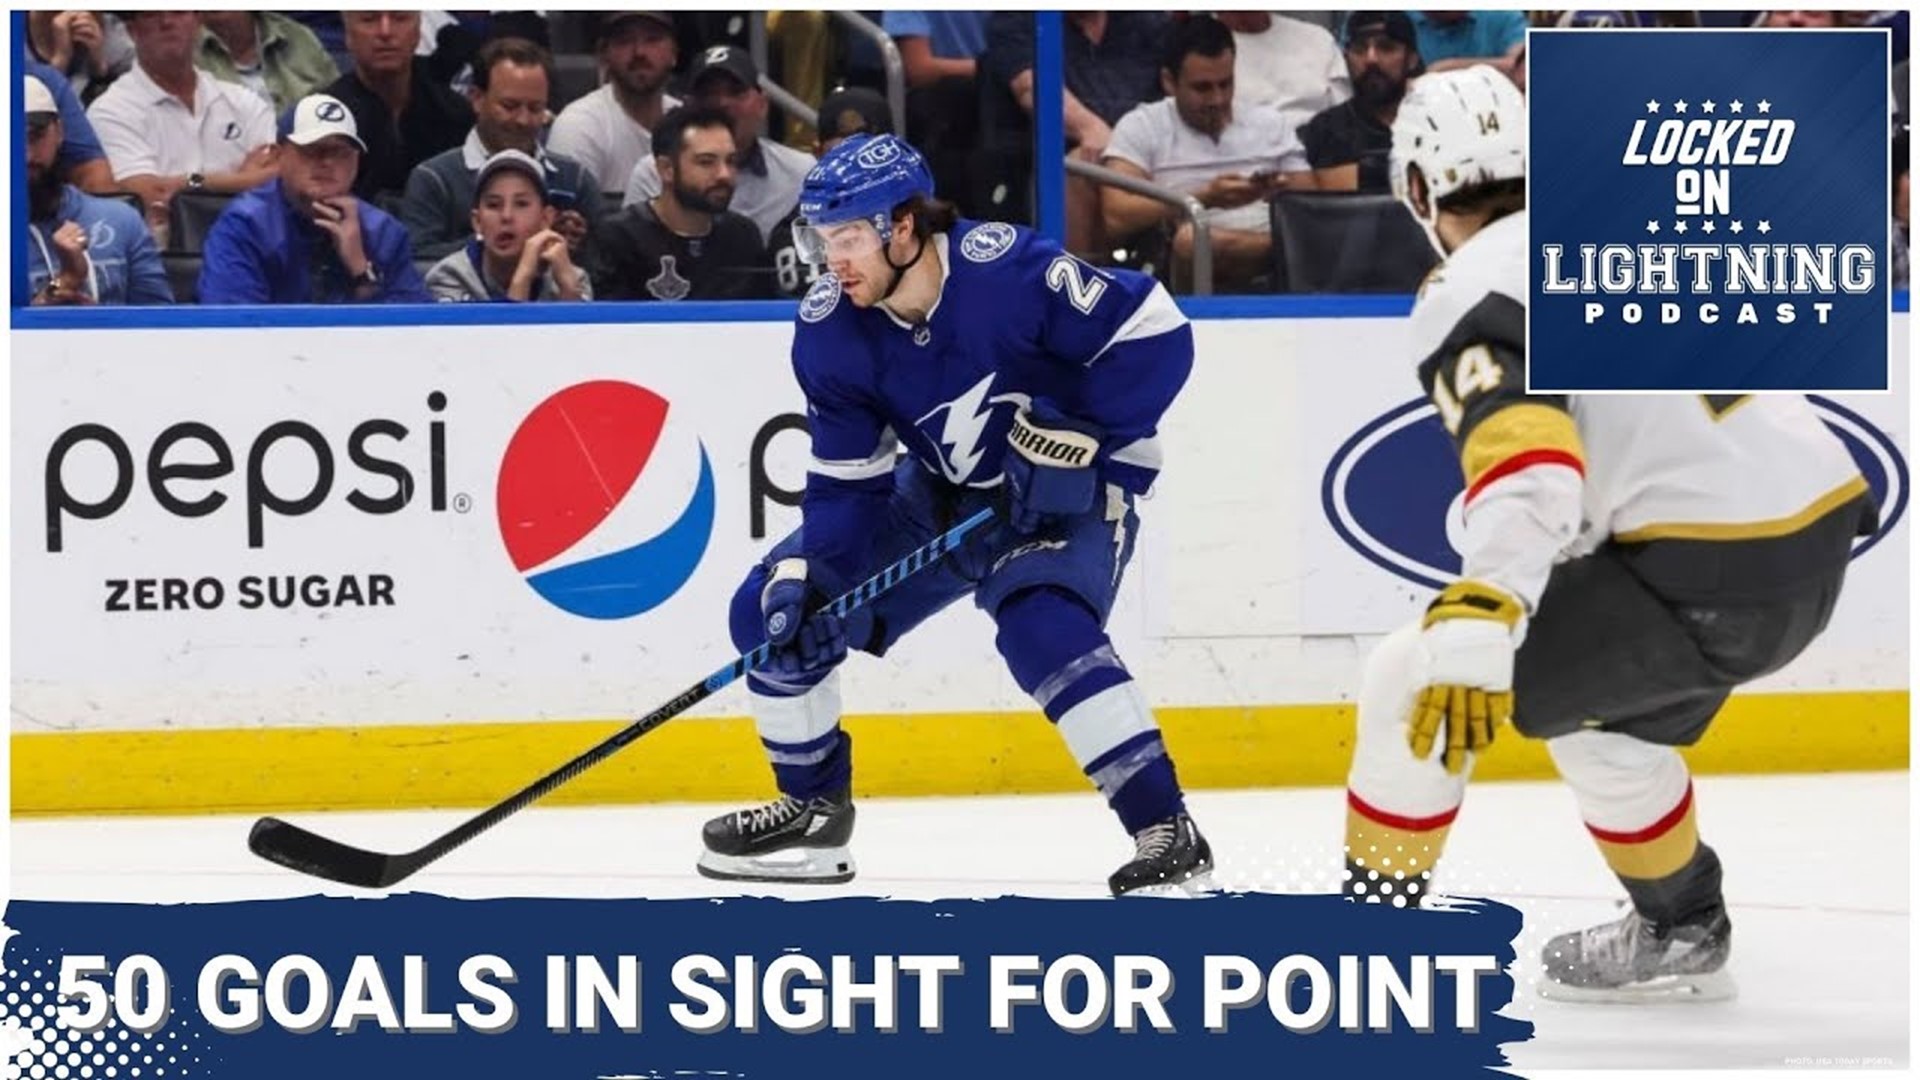 The Lightning failed to put a winning streak together last night as they fell to the Golden Knights in overtime. Adam discusses some of the issues still looming for